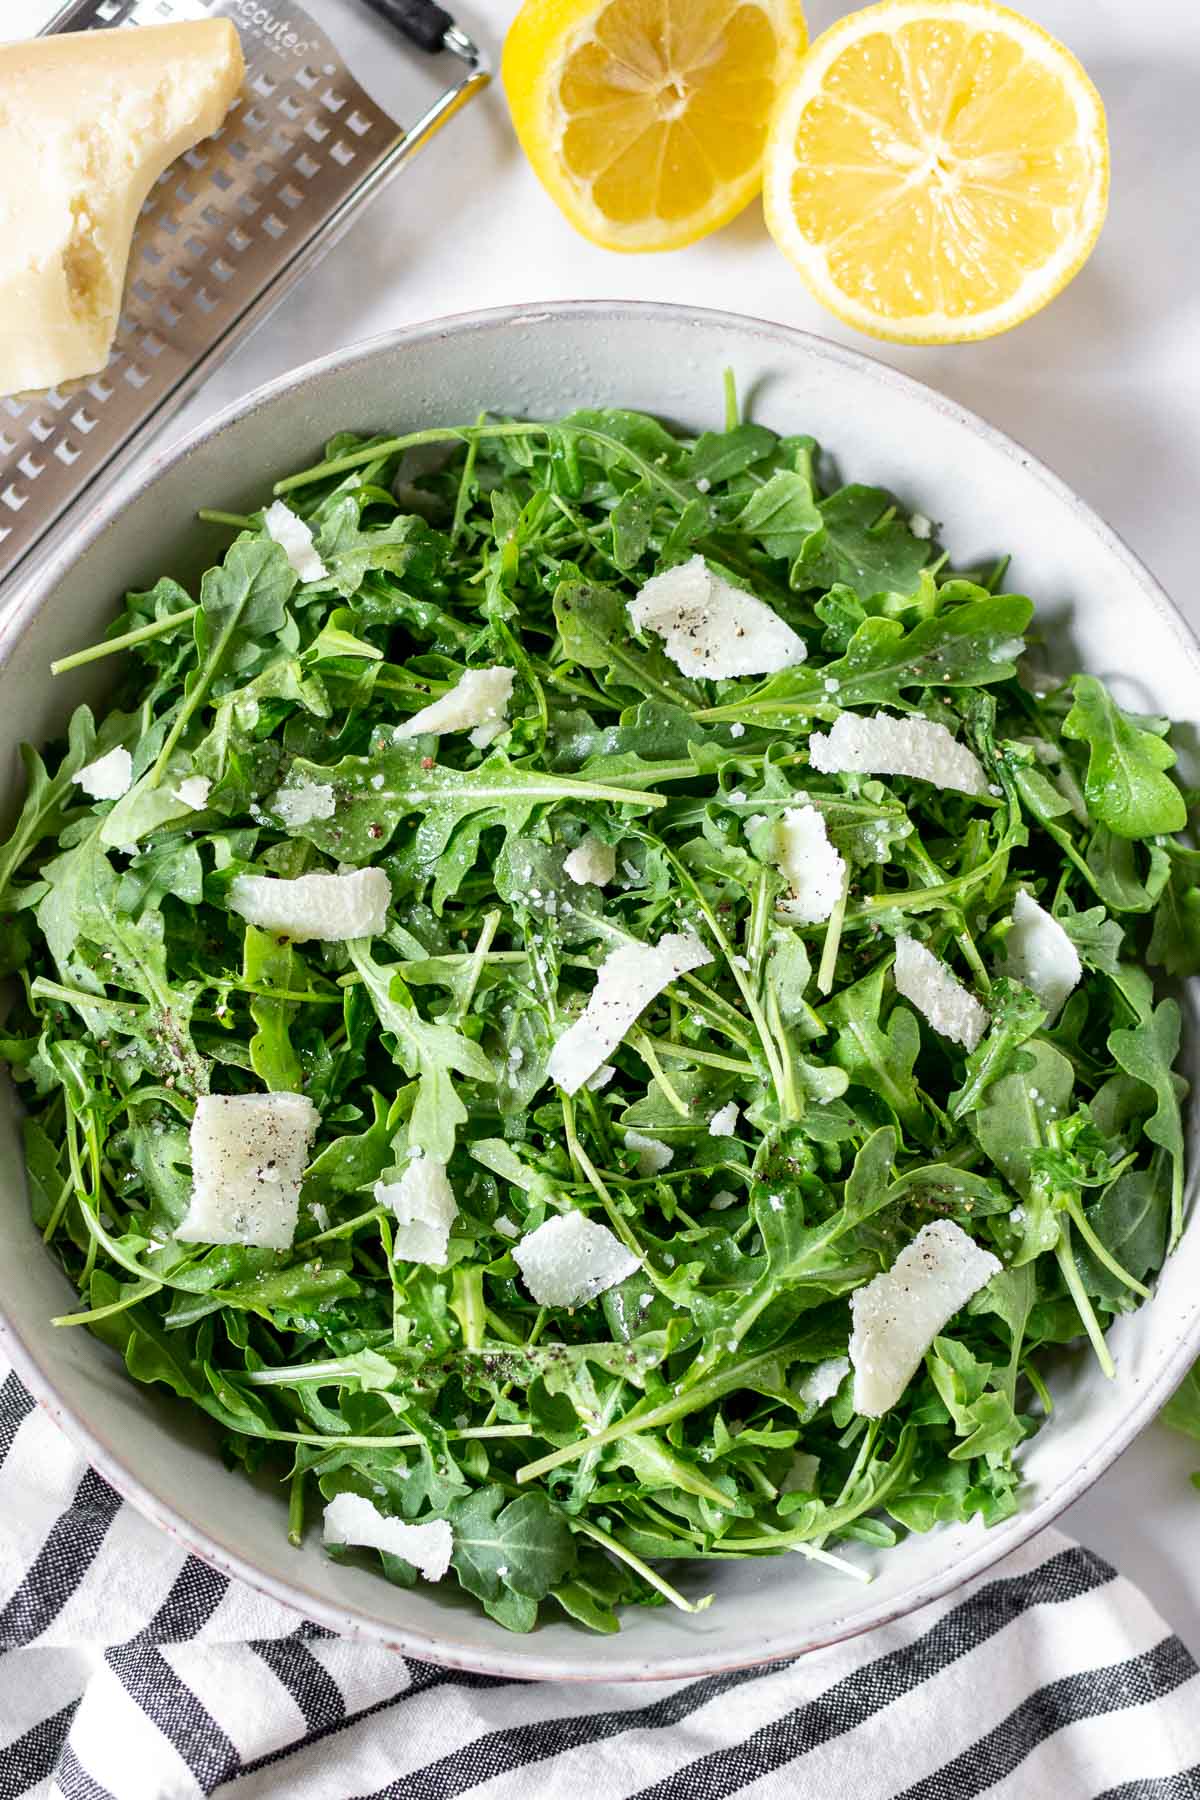 A simple arugula salad in a white bowl sprinkled with Parmesan.